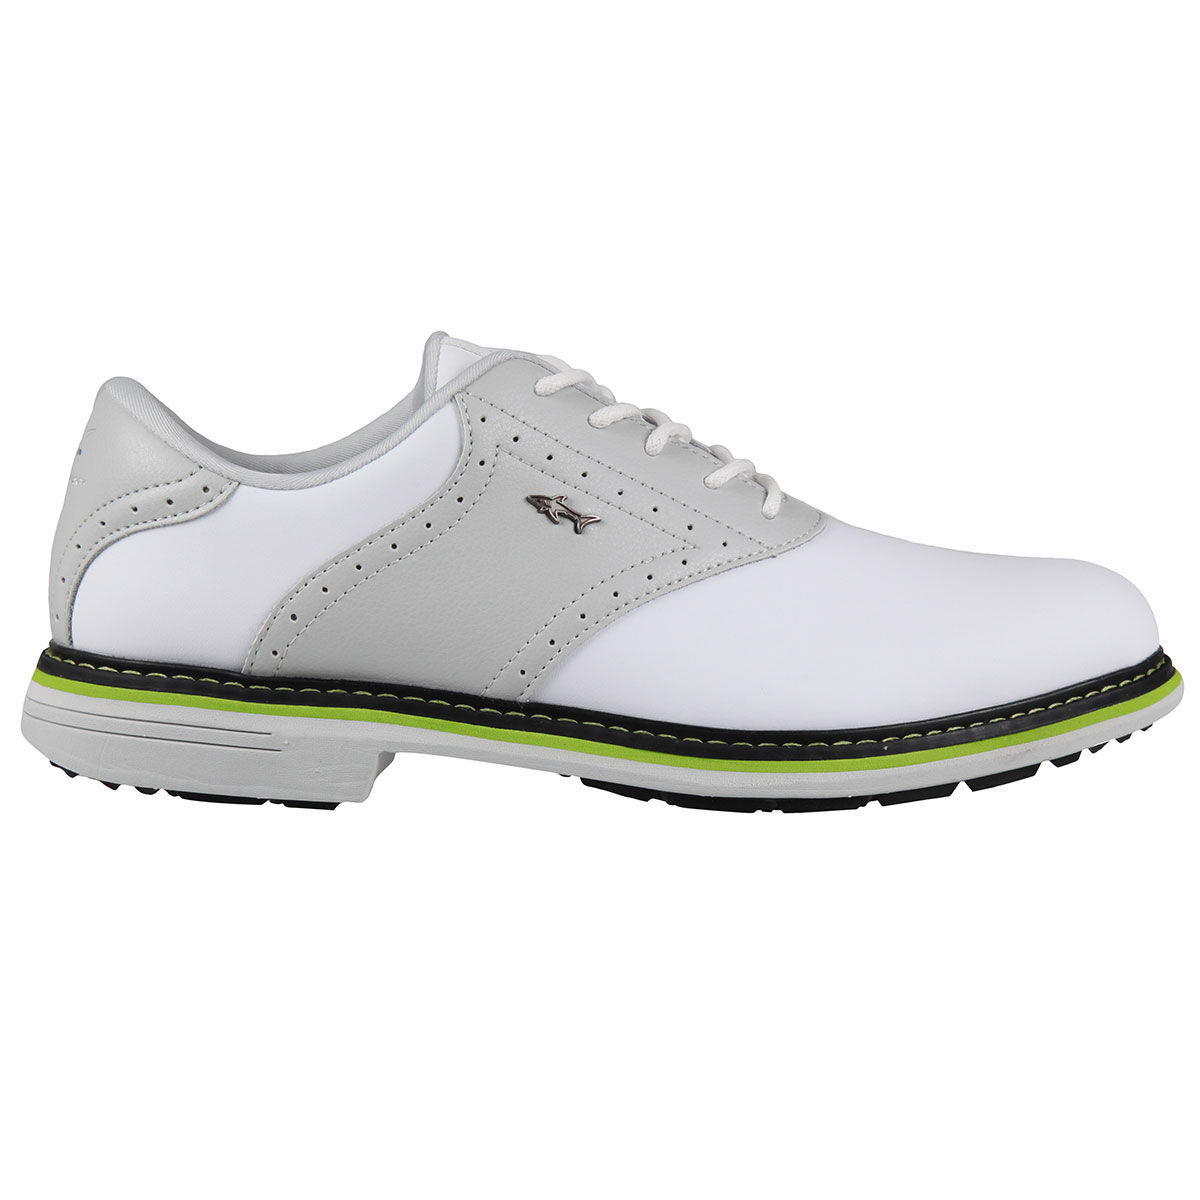 Greg Norman Men’s Isa Tour 2 Waterproof Spikeless Golf Shoes, Mens, White/grey/lime, 10 | American Golf